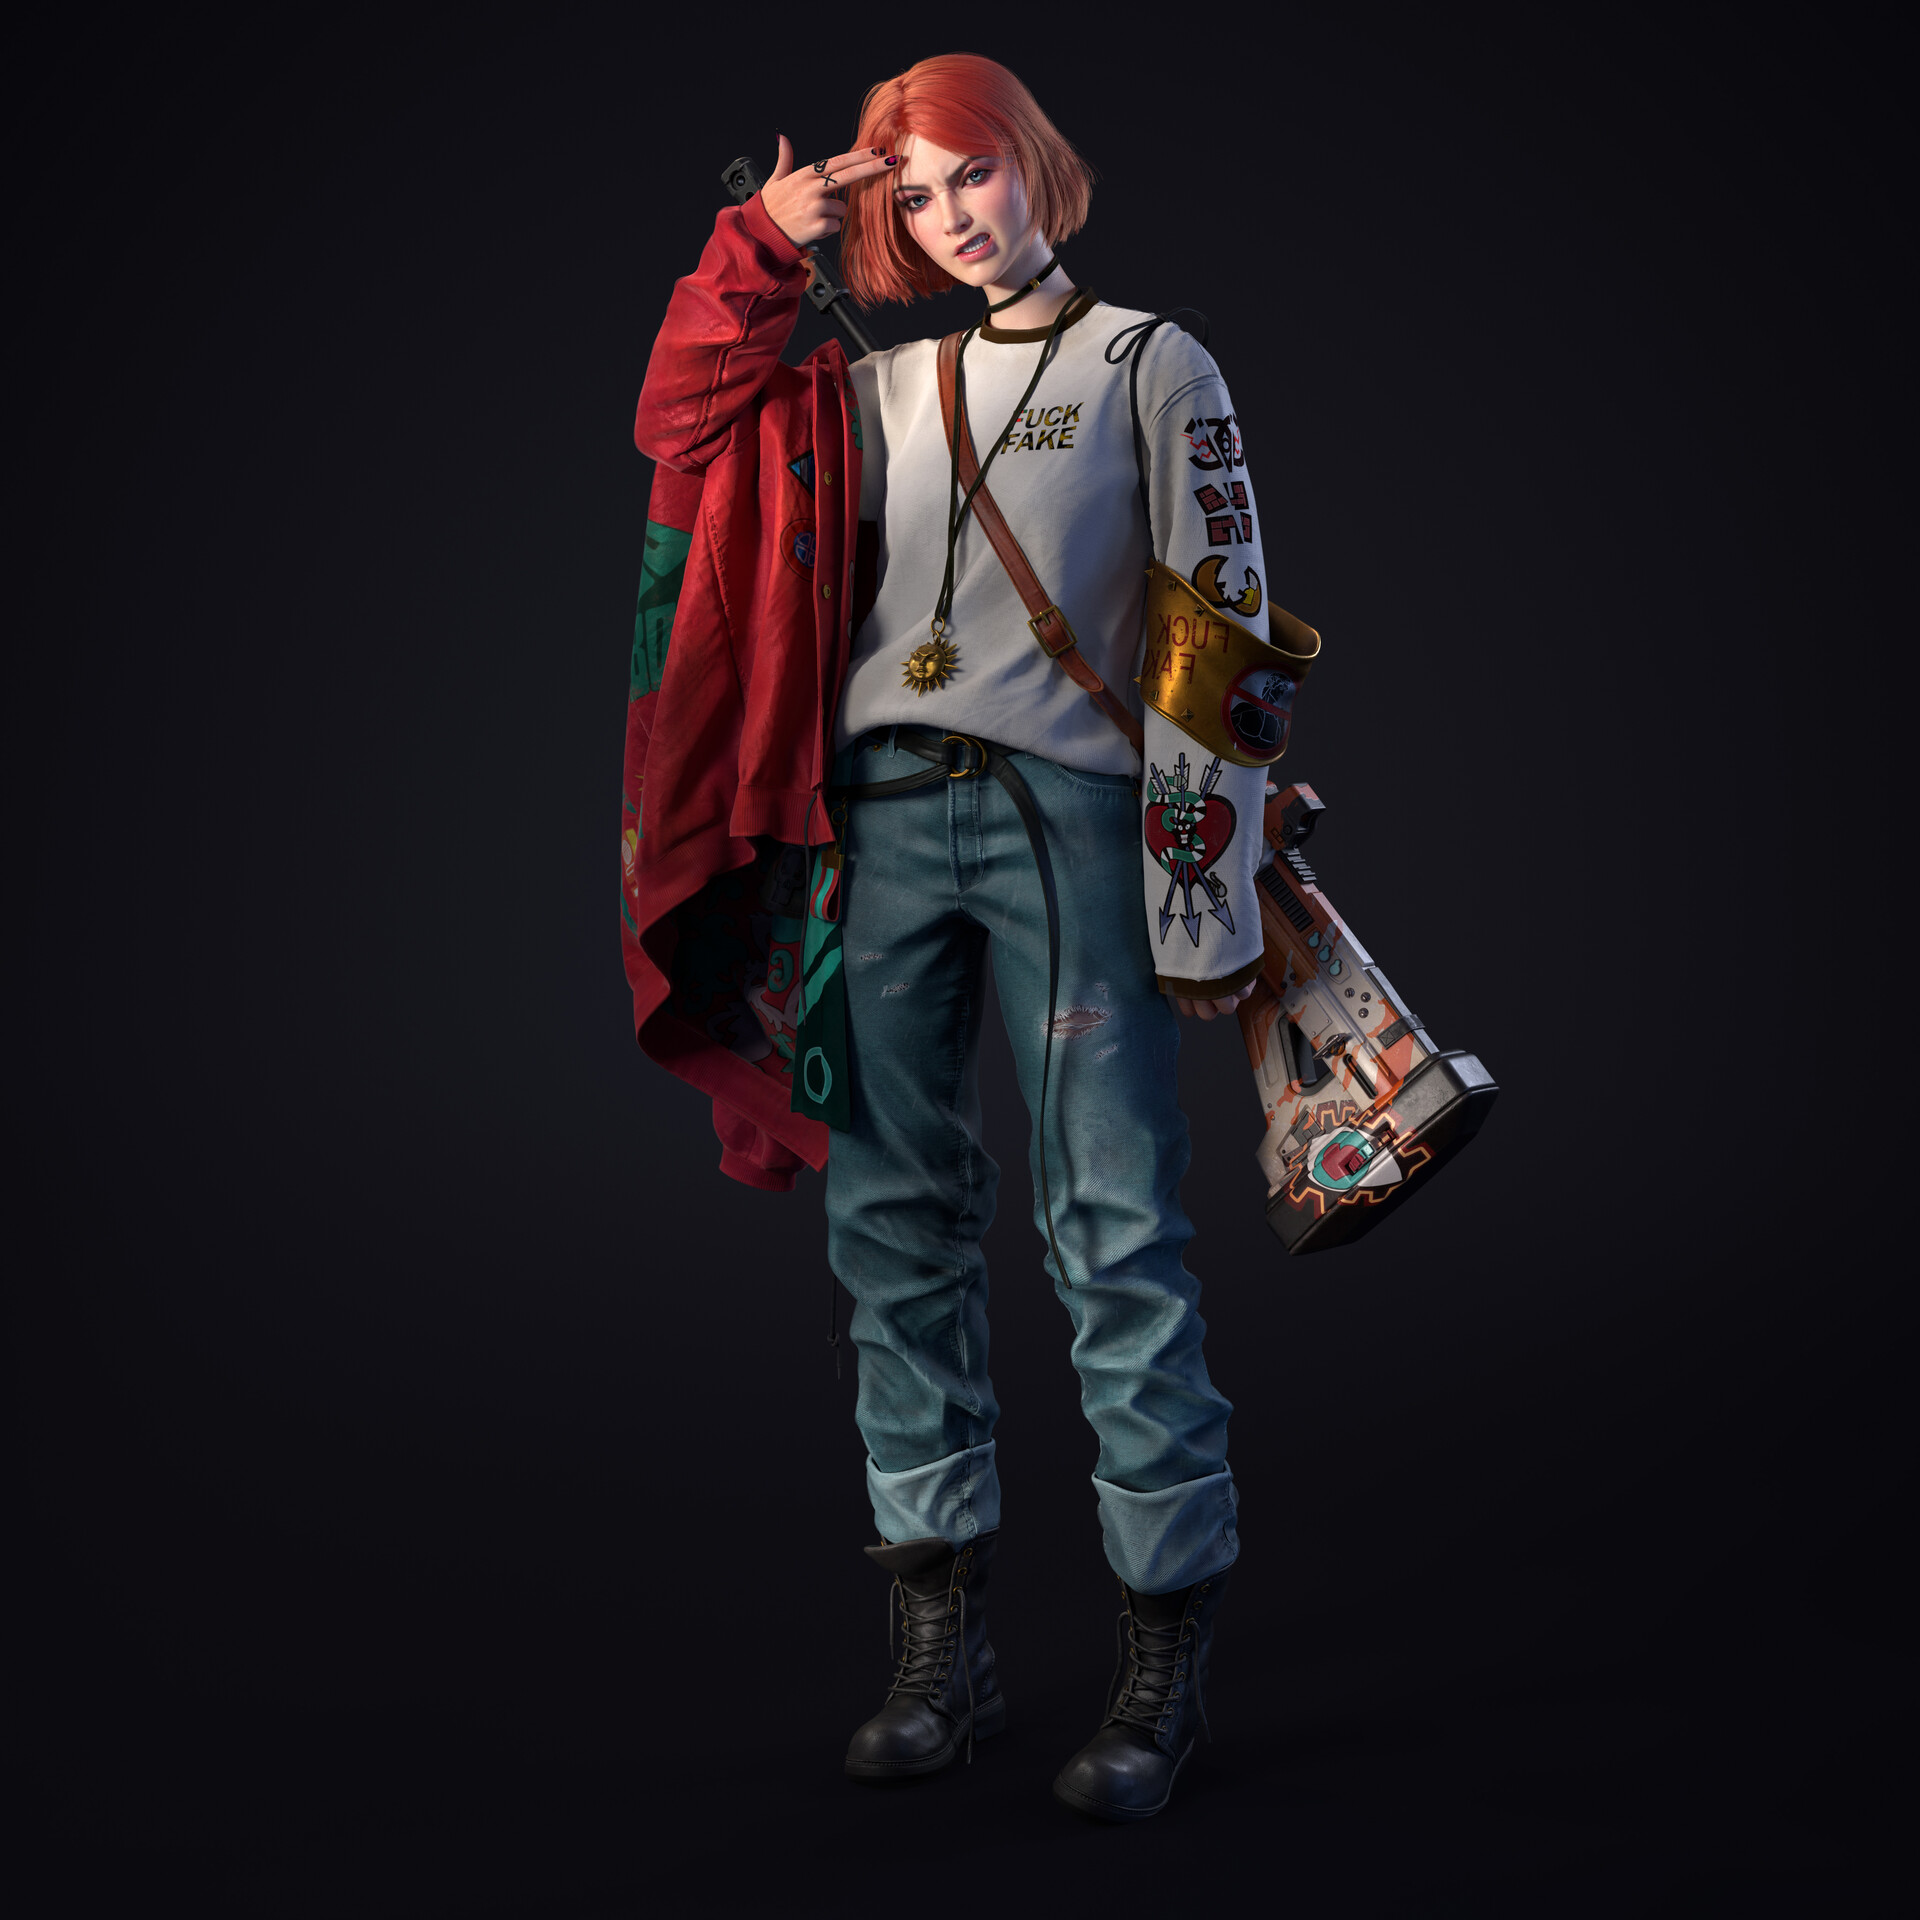 General 1920x1920 CGI women fuck artwork suicide redhead angry simple background ArtStation standing boots